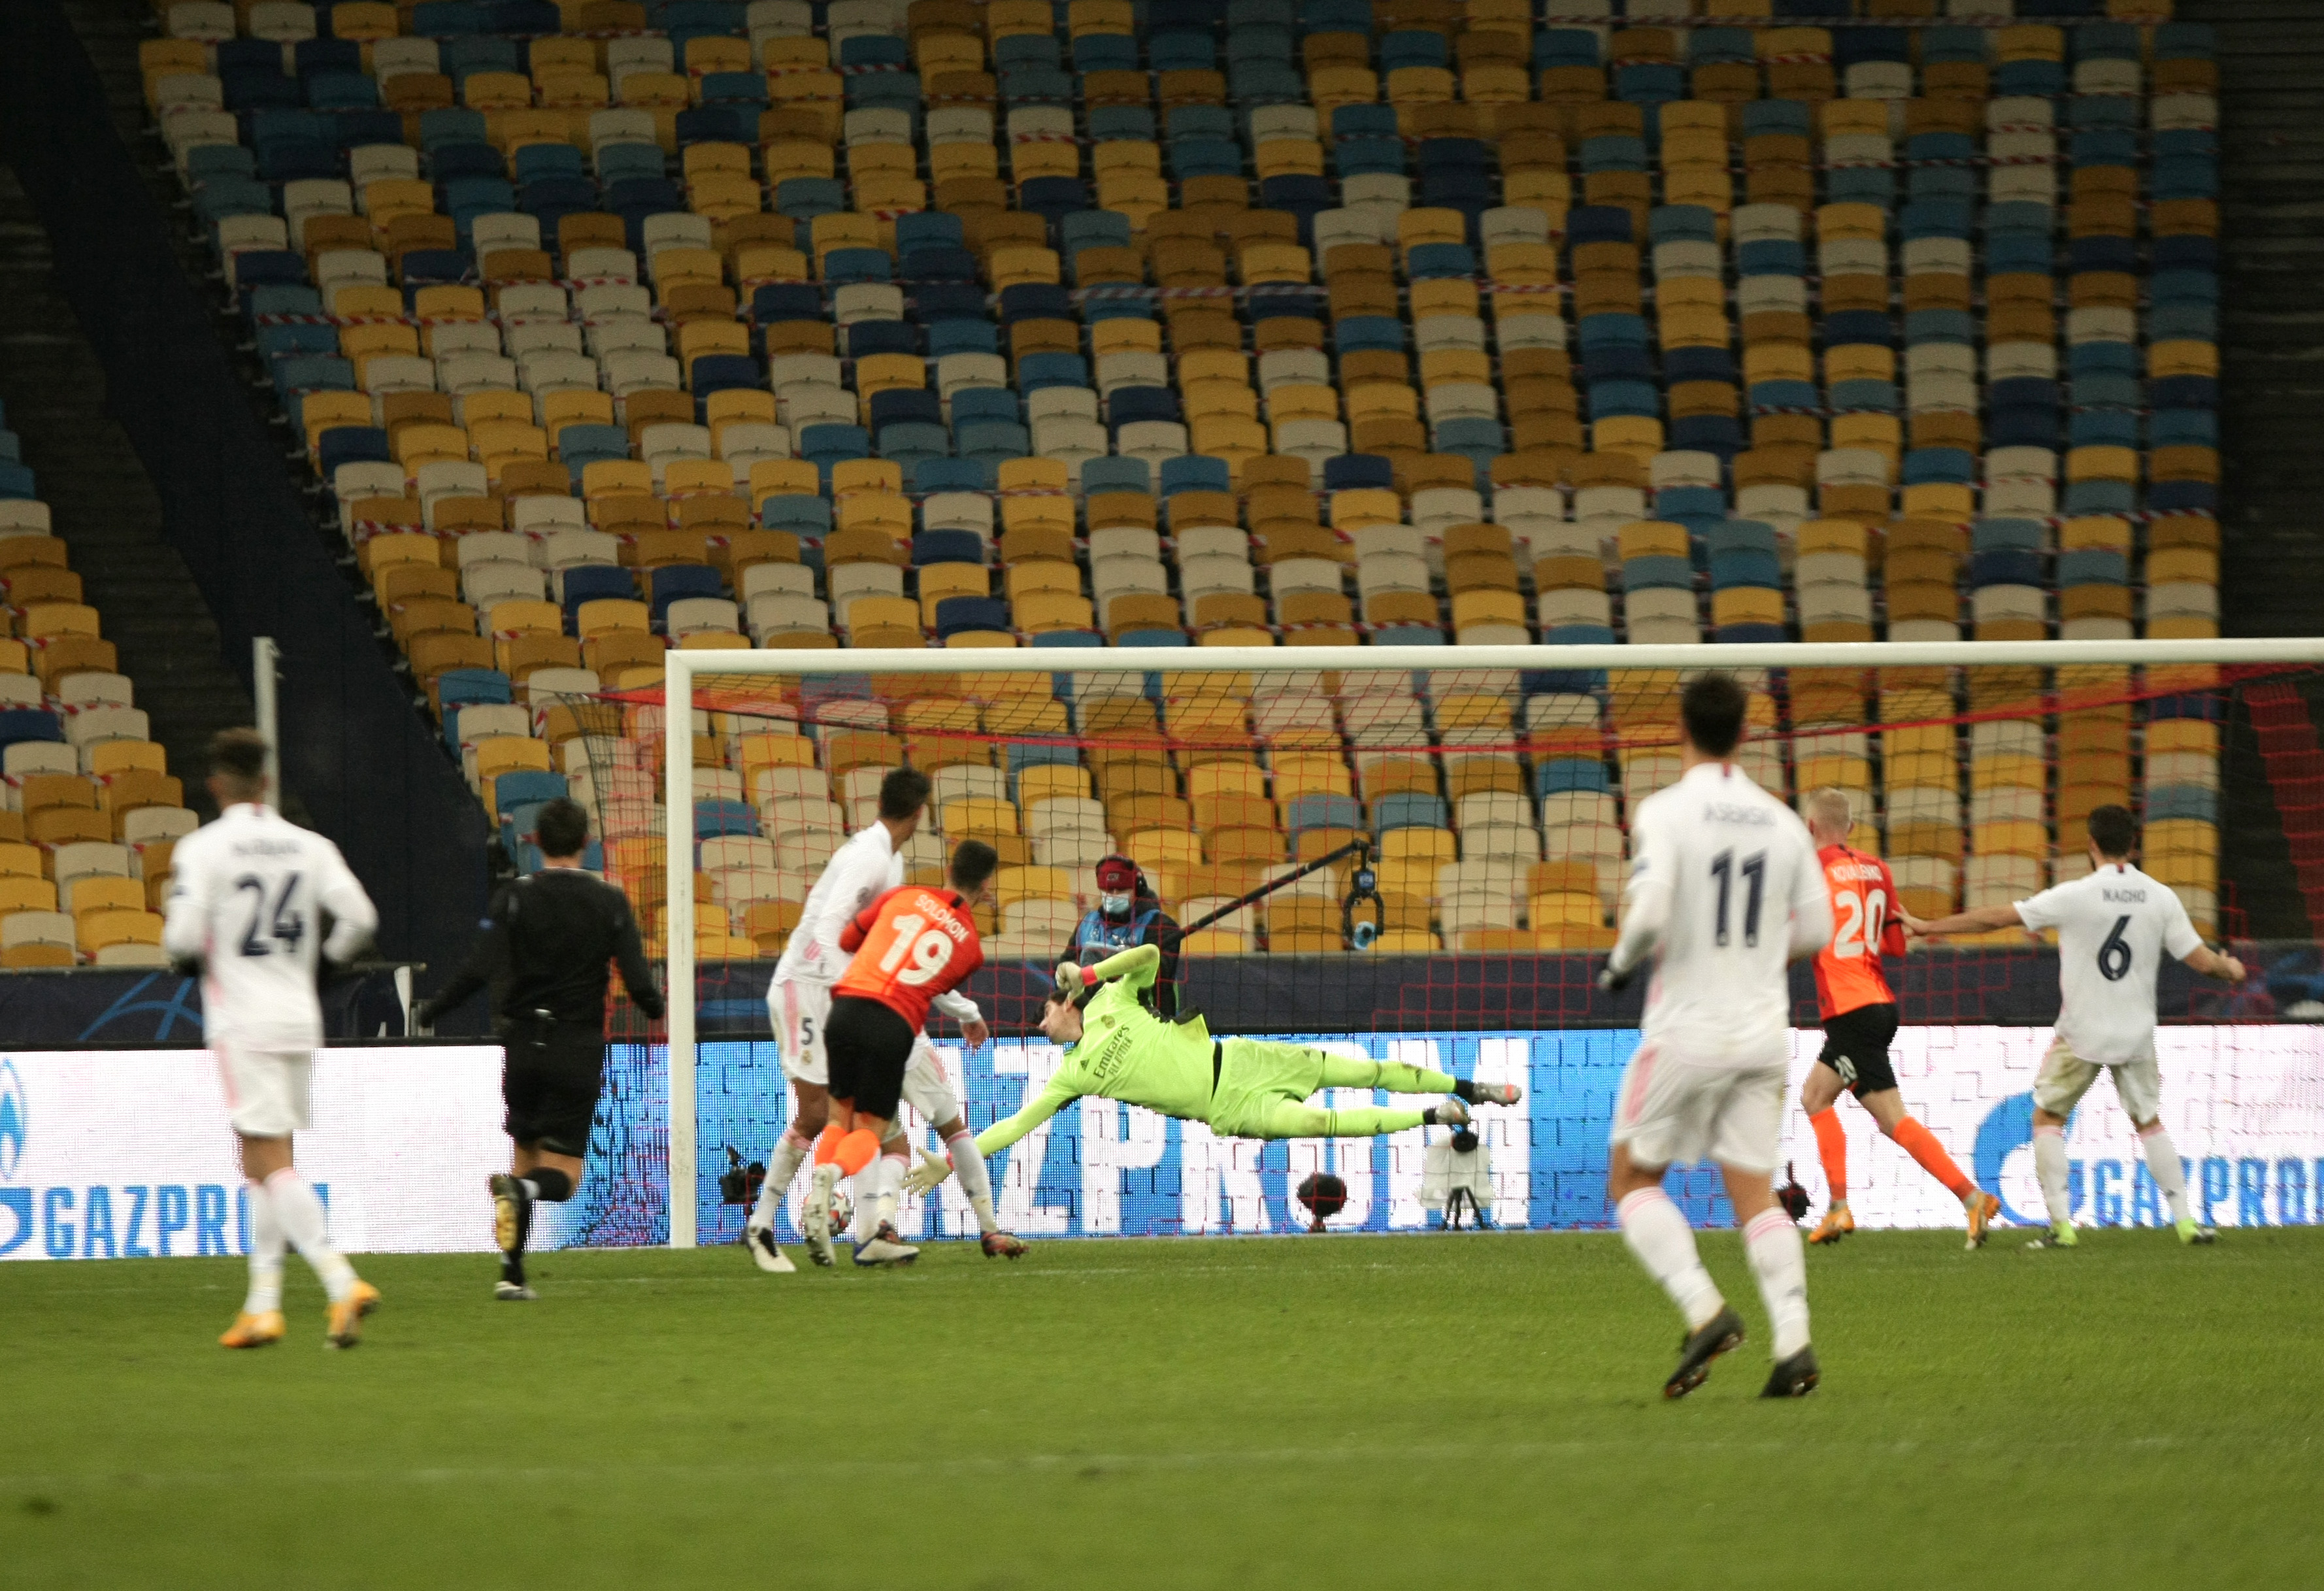 UEFA Champions League match between FC Shakhtar and FC Real